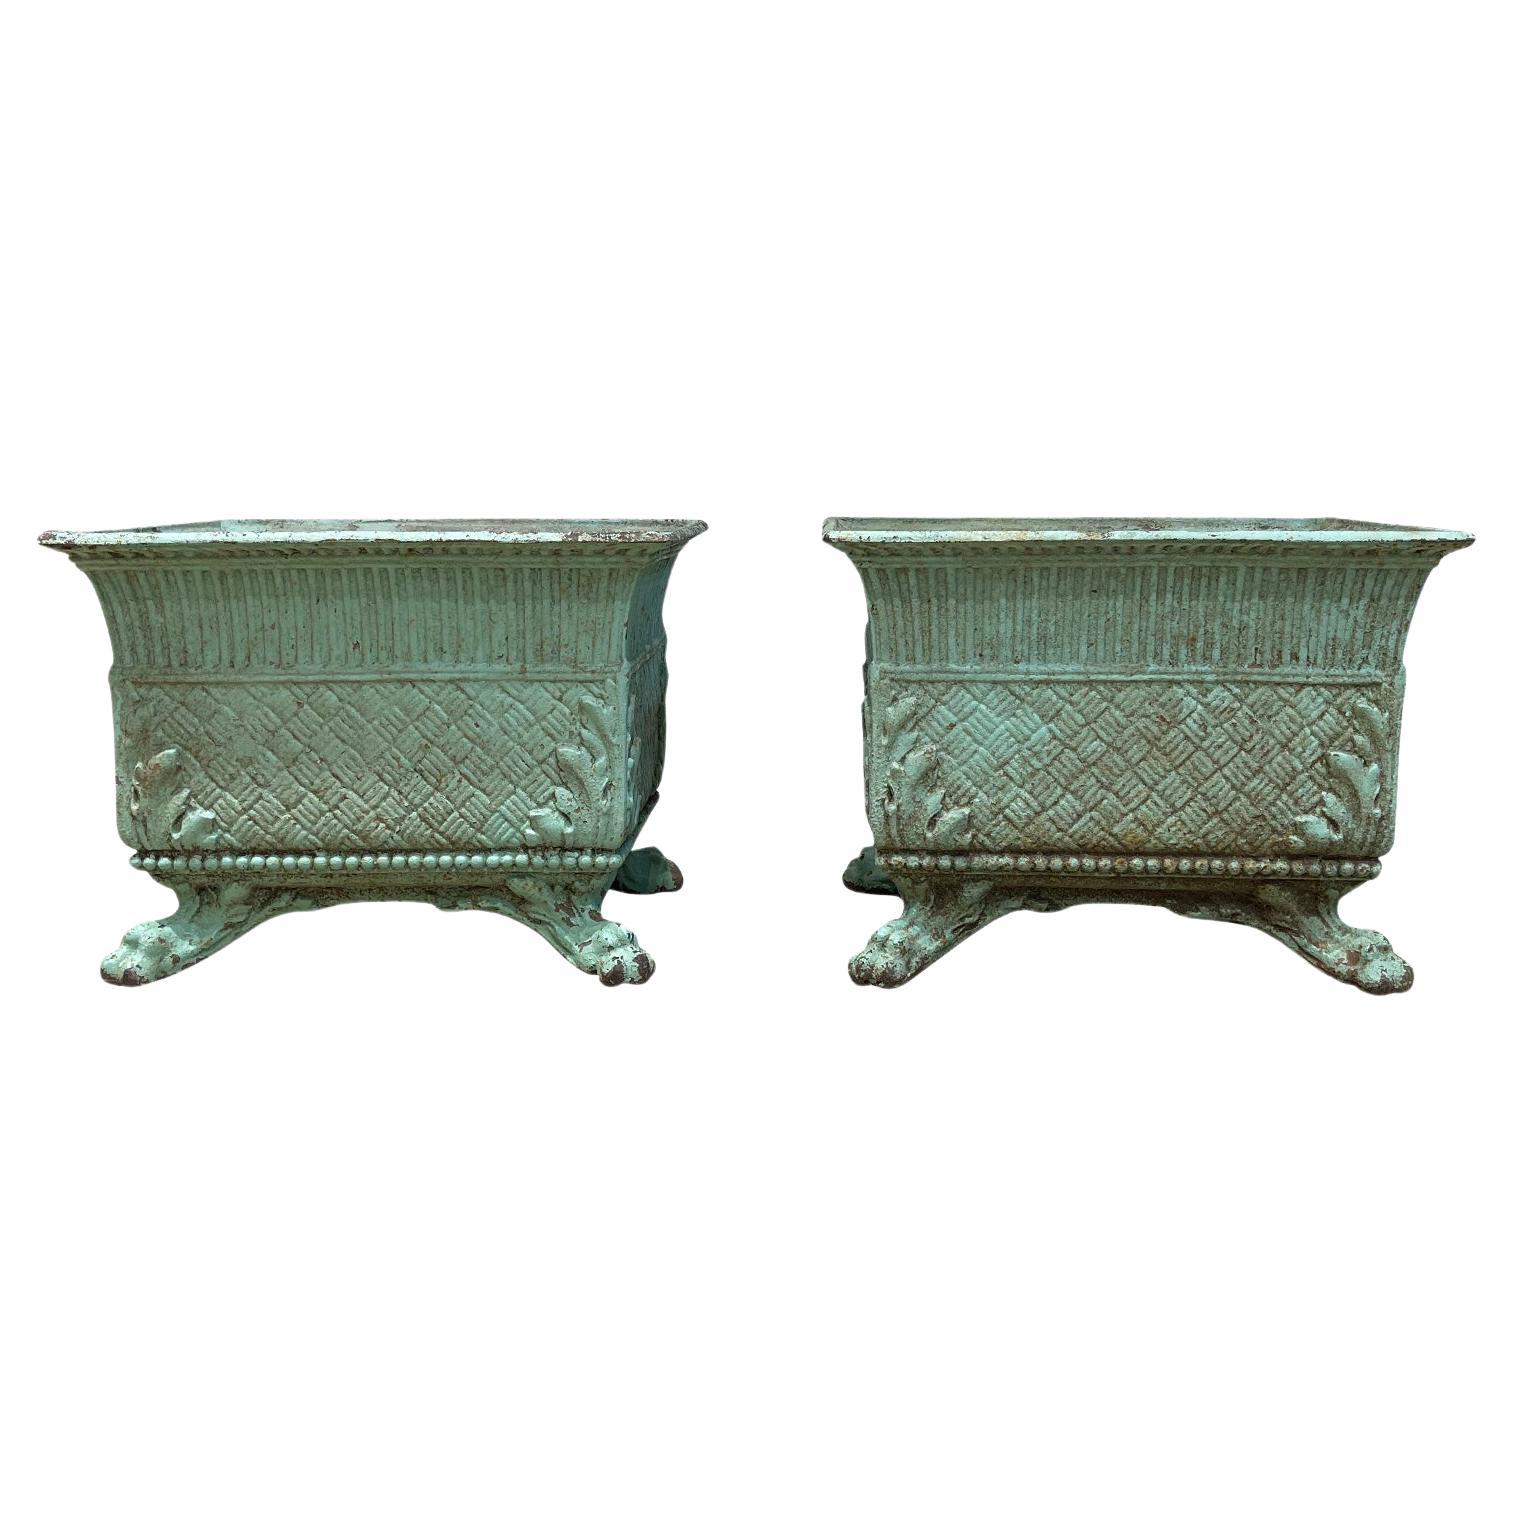 19th Century Pair of French Antique Cast Iron Planters